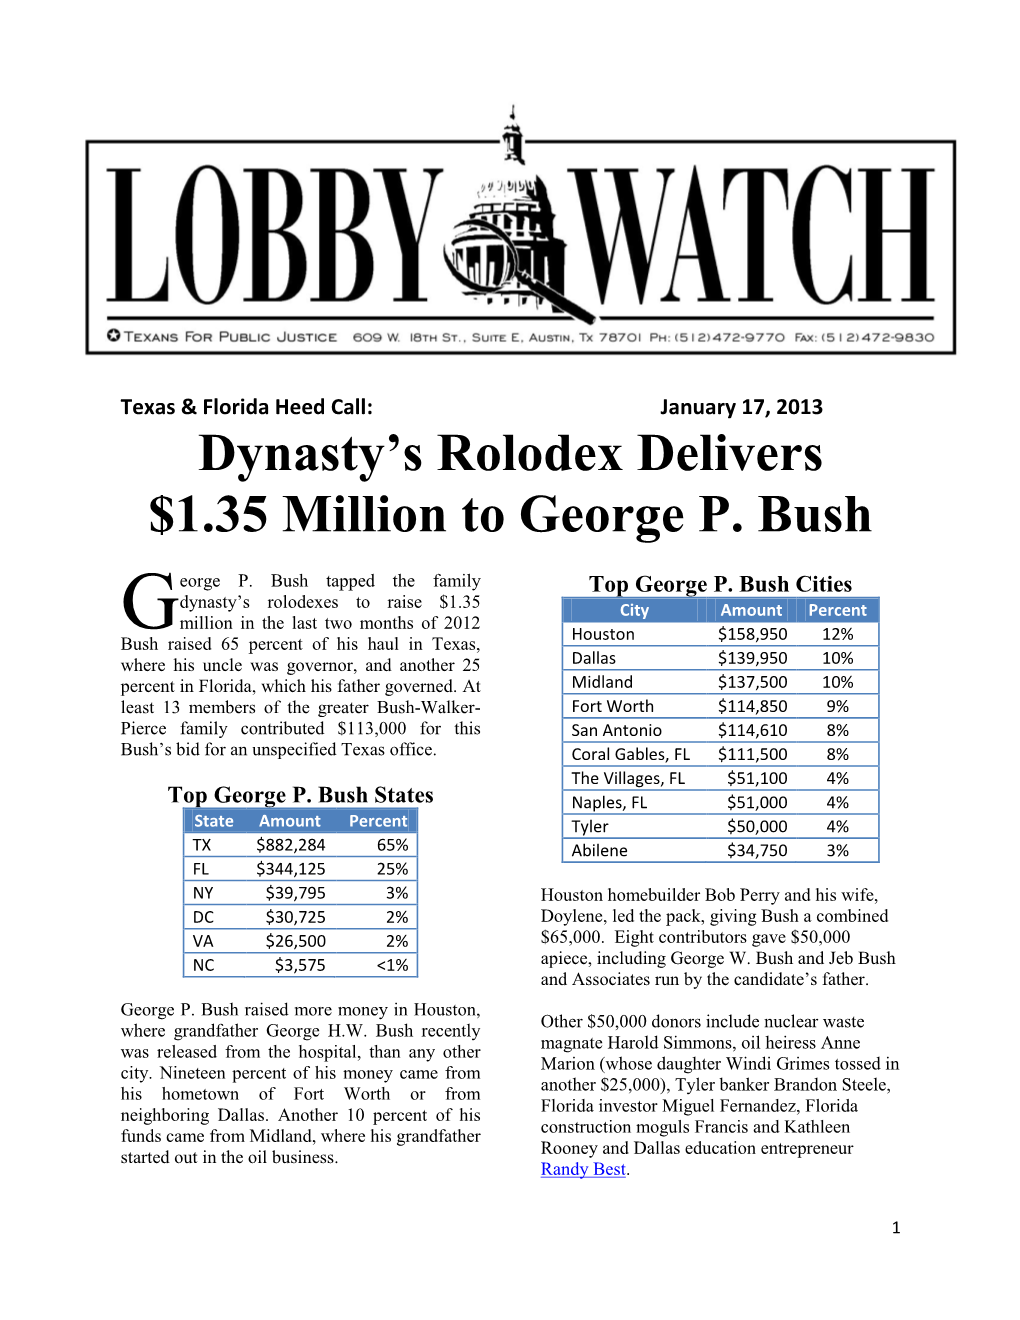 Dynasty's Rolodex Delivers $1.35 Million to George P. Bush